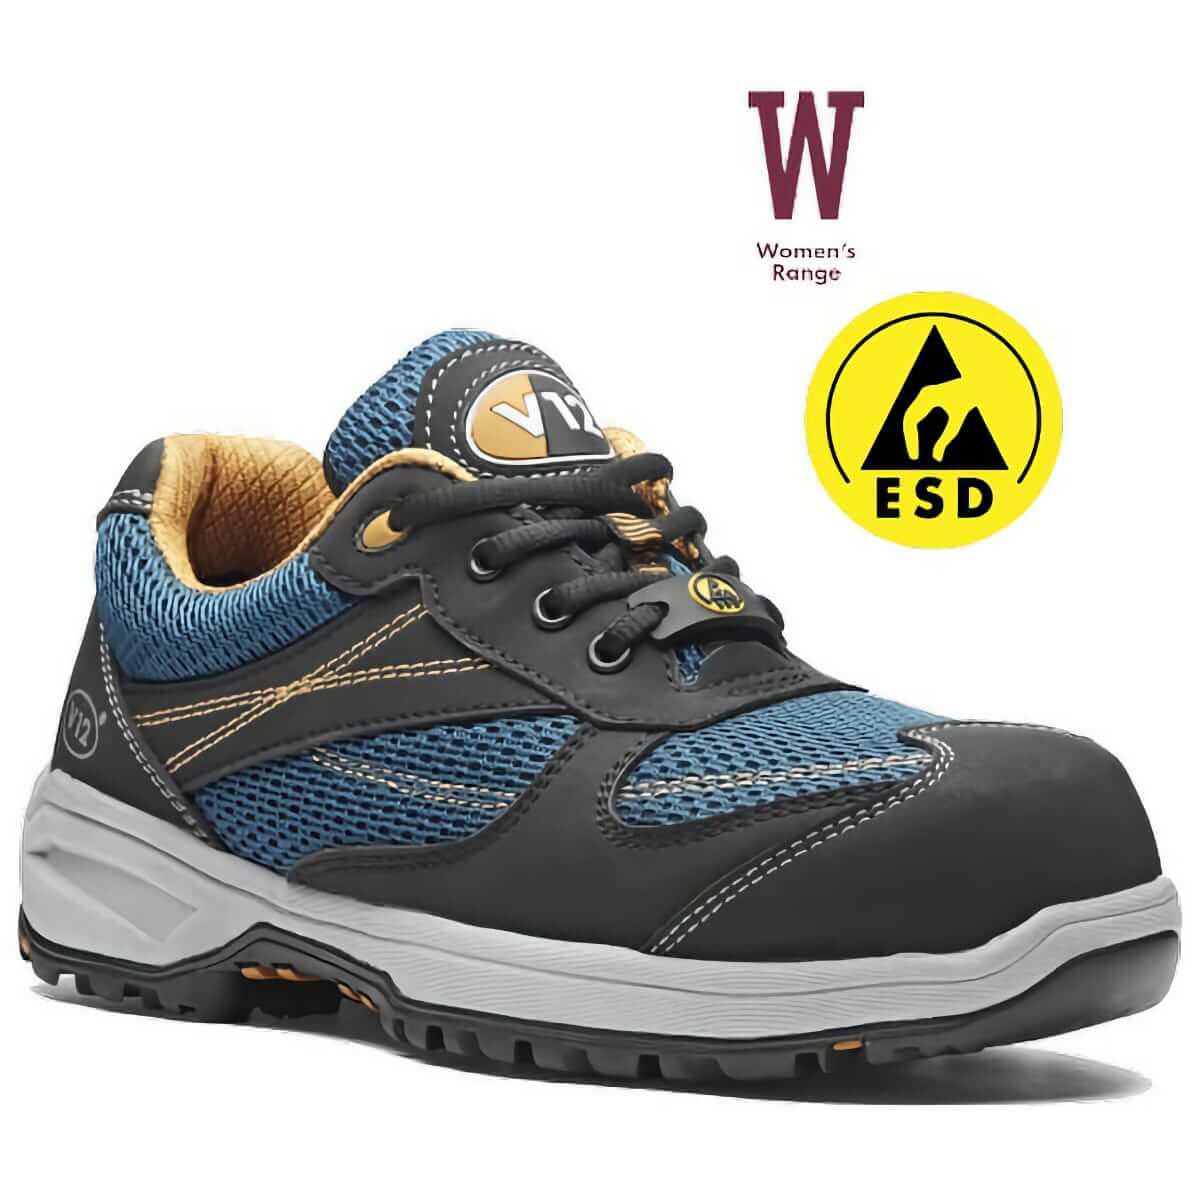 ESD safety shoes laceup uvex 1 sport S1 SRC  VWR